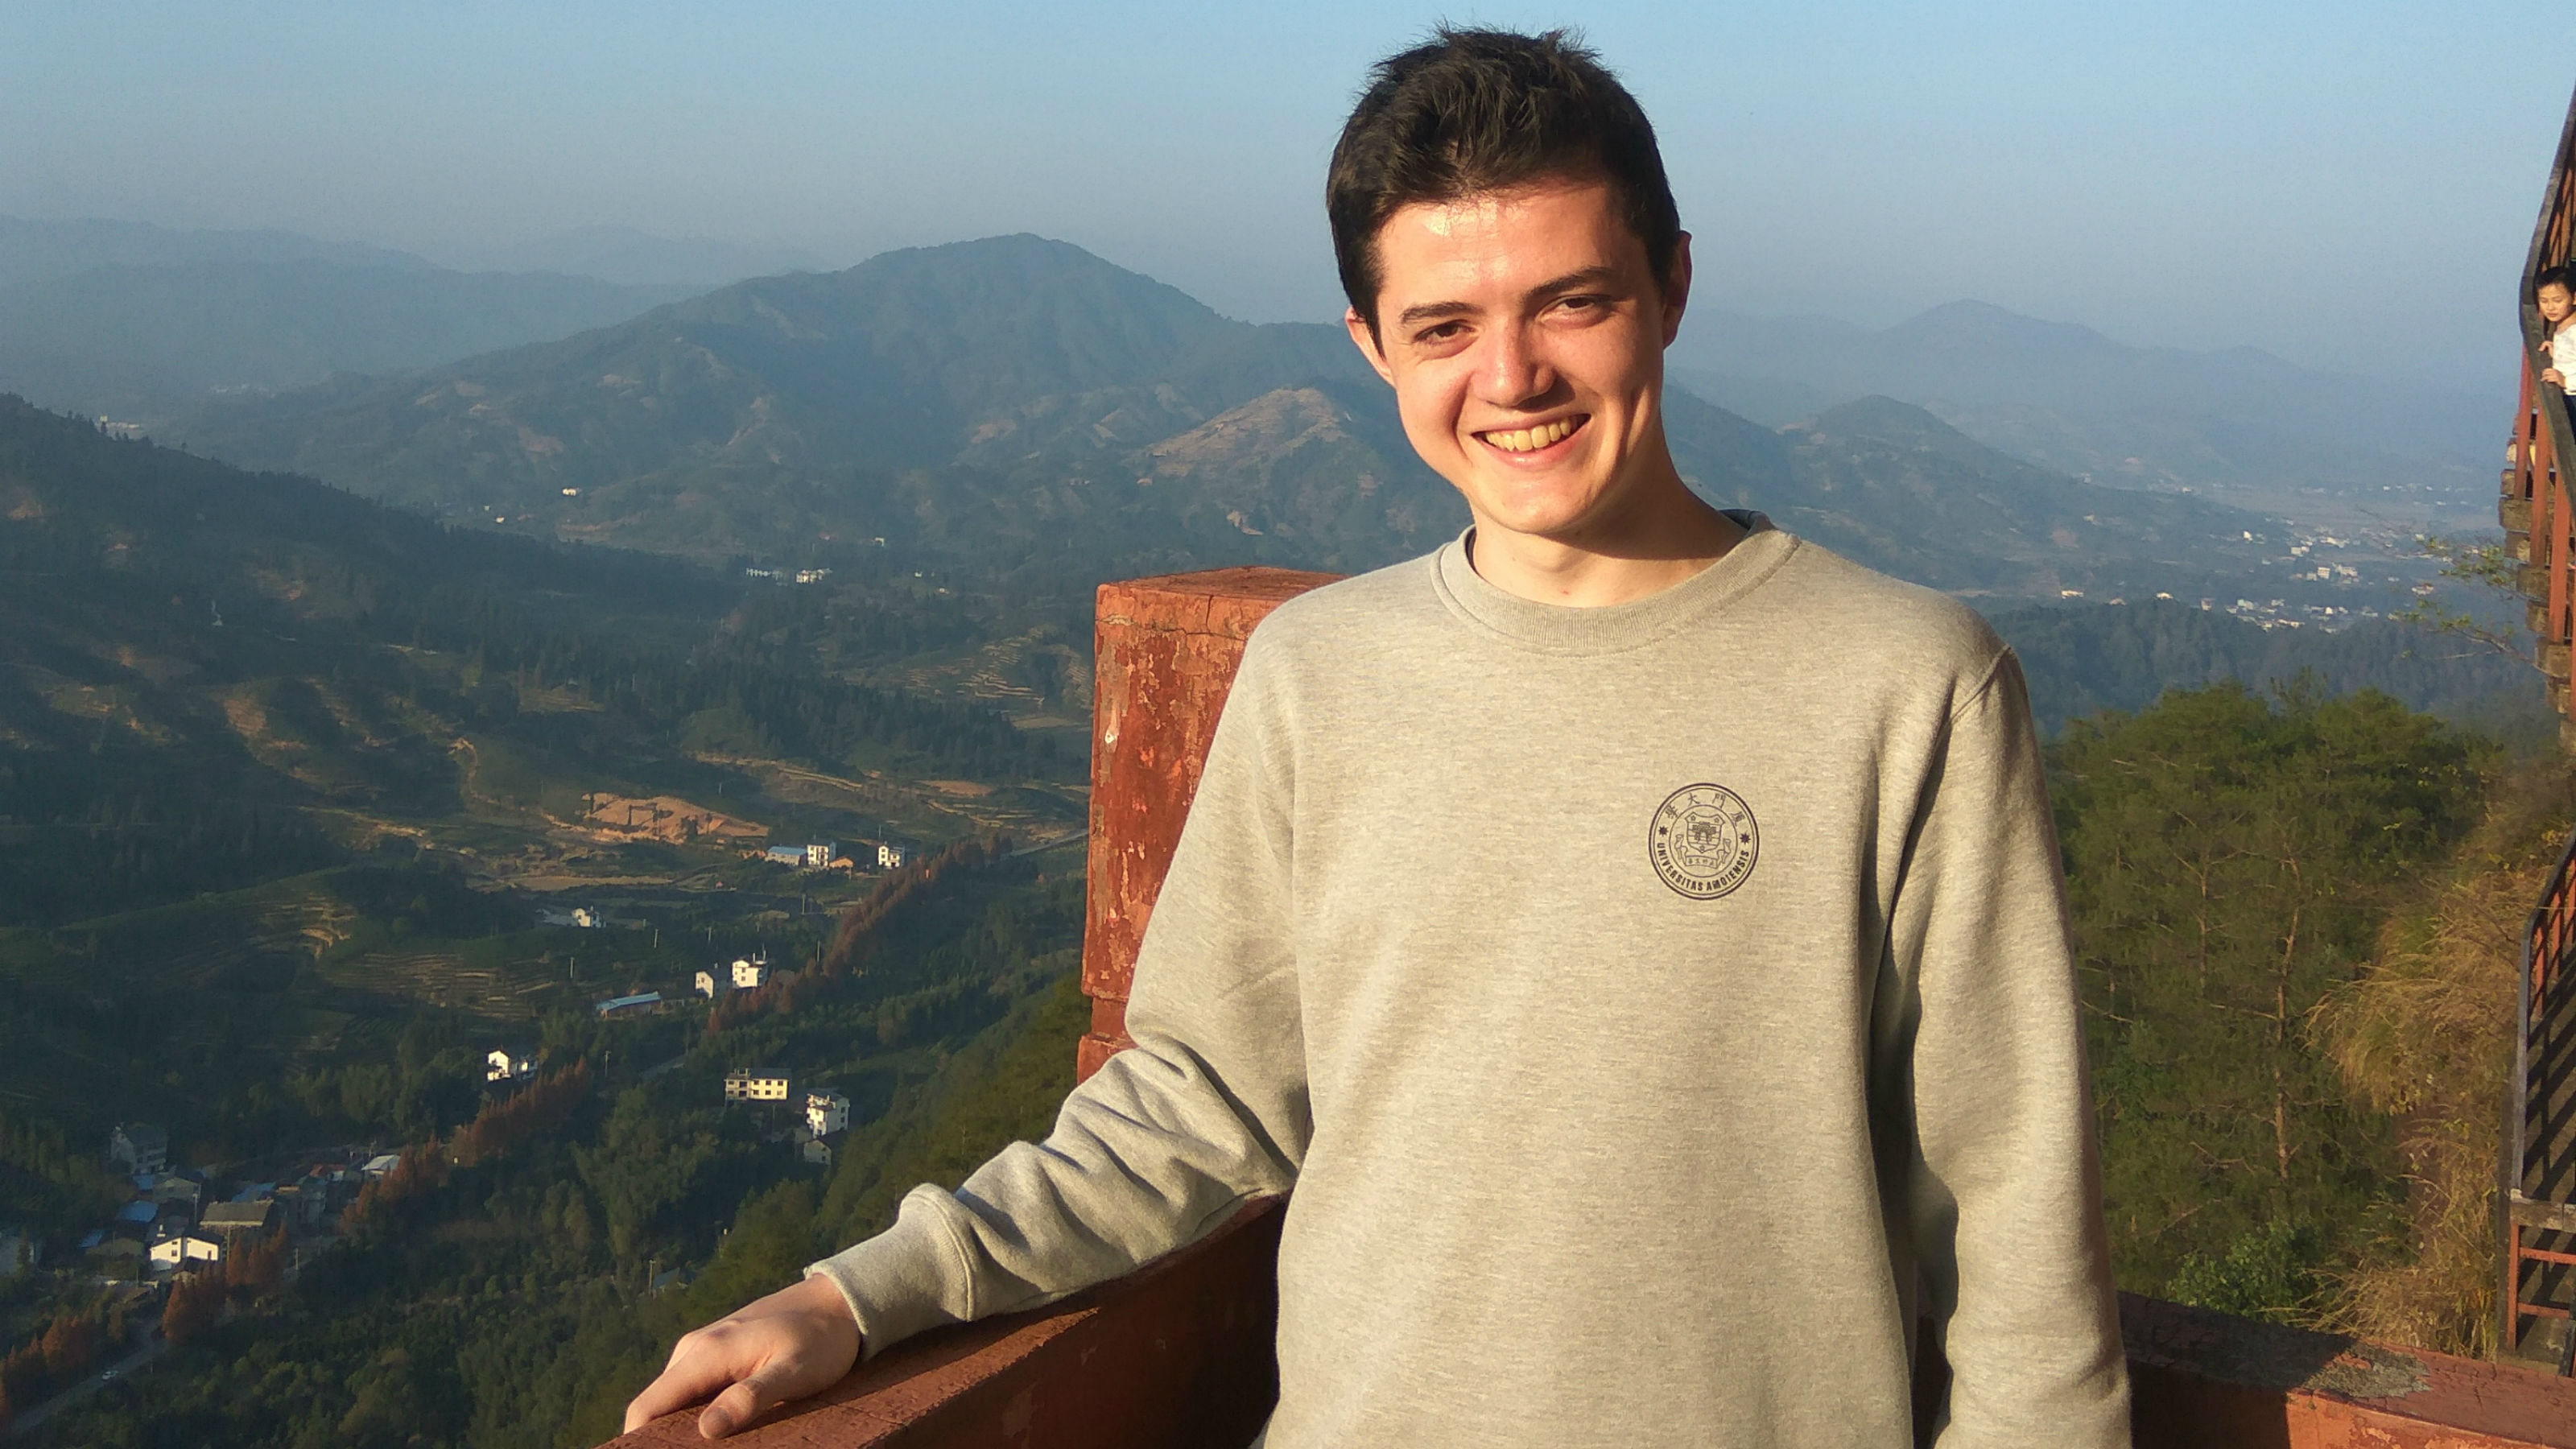 Ed on exchange in China, standing in front of a hilly landscape.